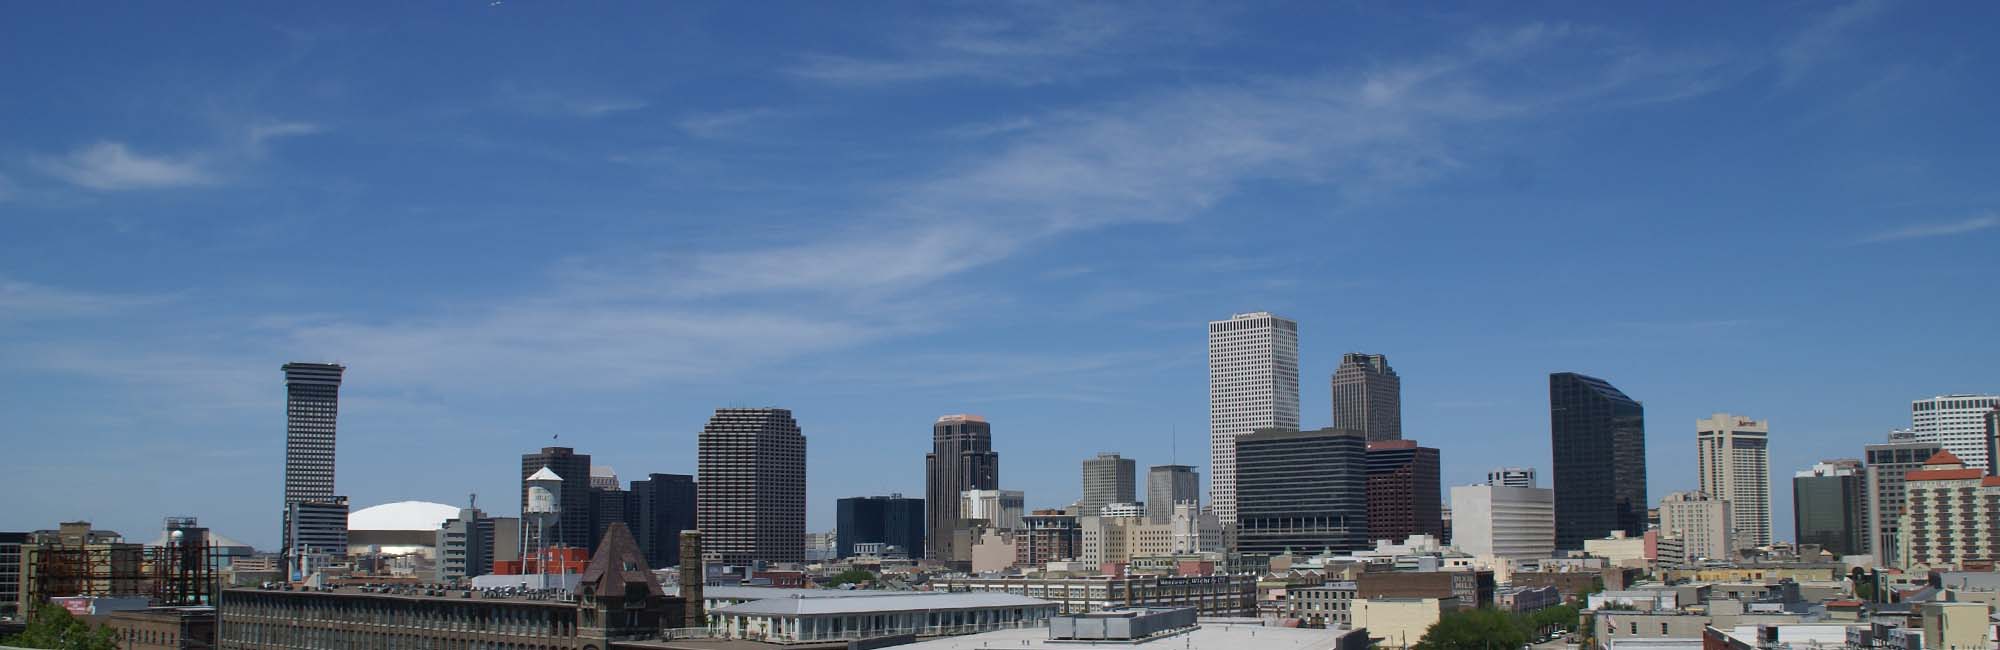 Skyline of Downtown New Orleans